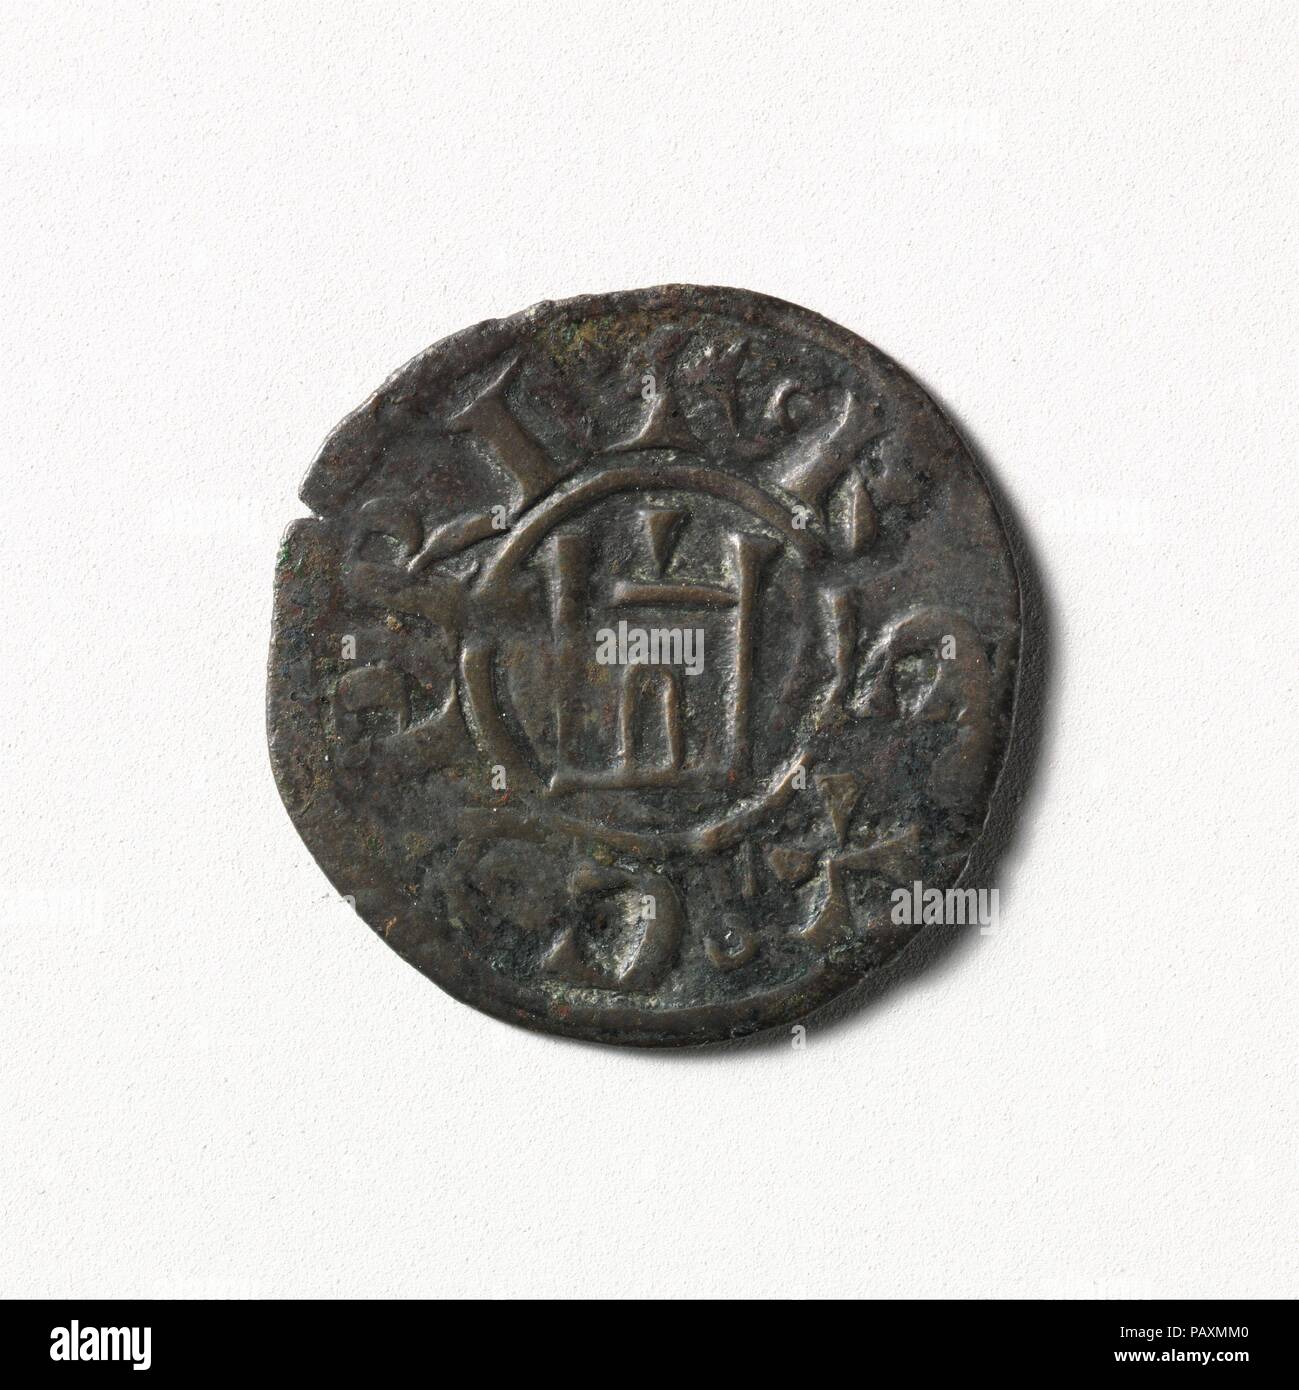 Coin (Denier) of Henry I of Cyprus (1218-1253). Culture: Cypriote. Dimensions: Diam. 3/4 in. (1.9 cm). Date: 1218-1253. Museum: Metropolitan Museum of Art, New York, USA. Stock Photo